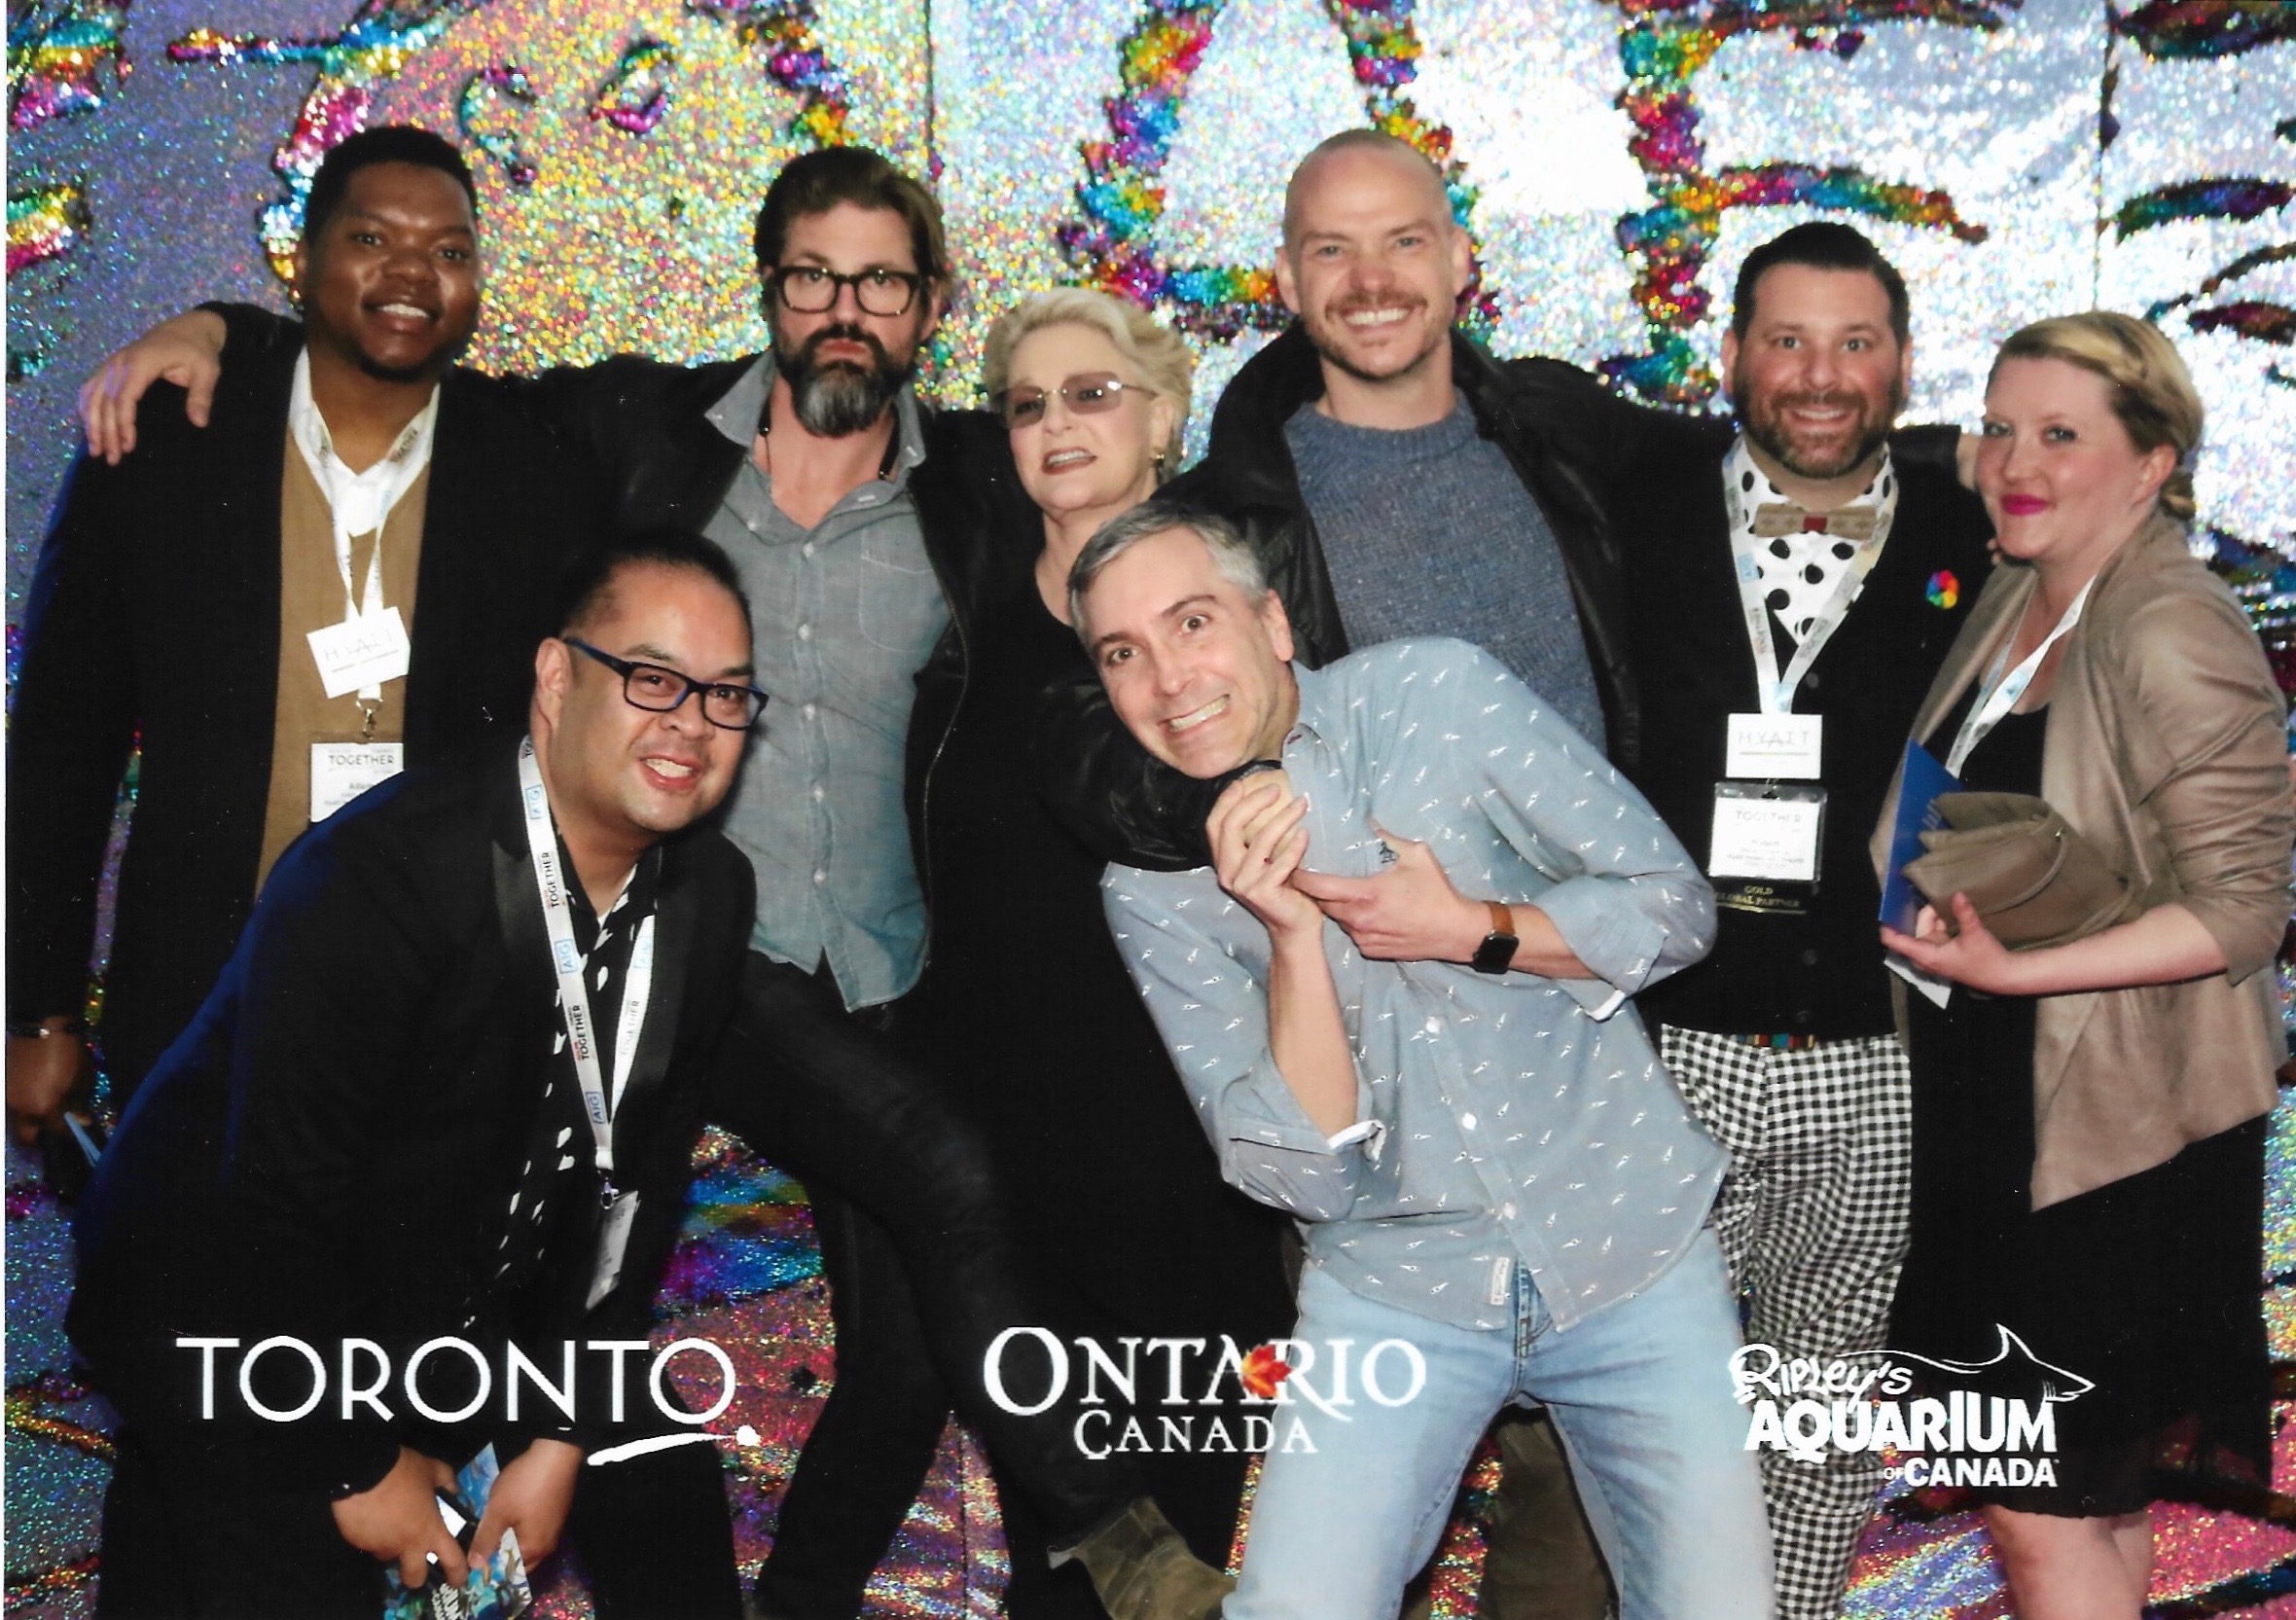 LGBT Travel Agent Convention in Toronto w/ fans 5/18